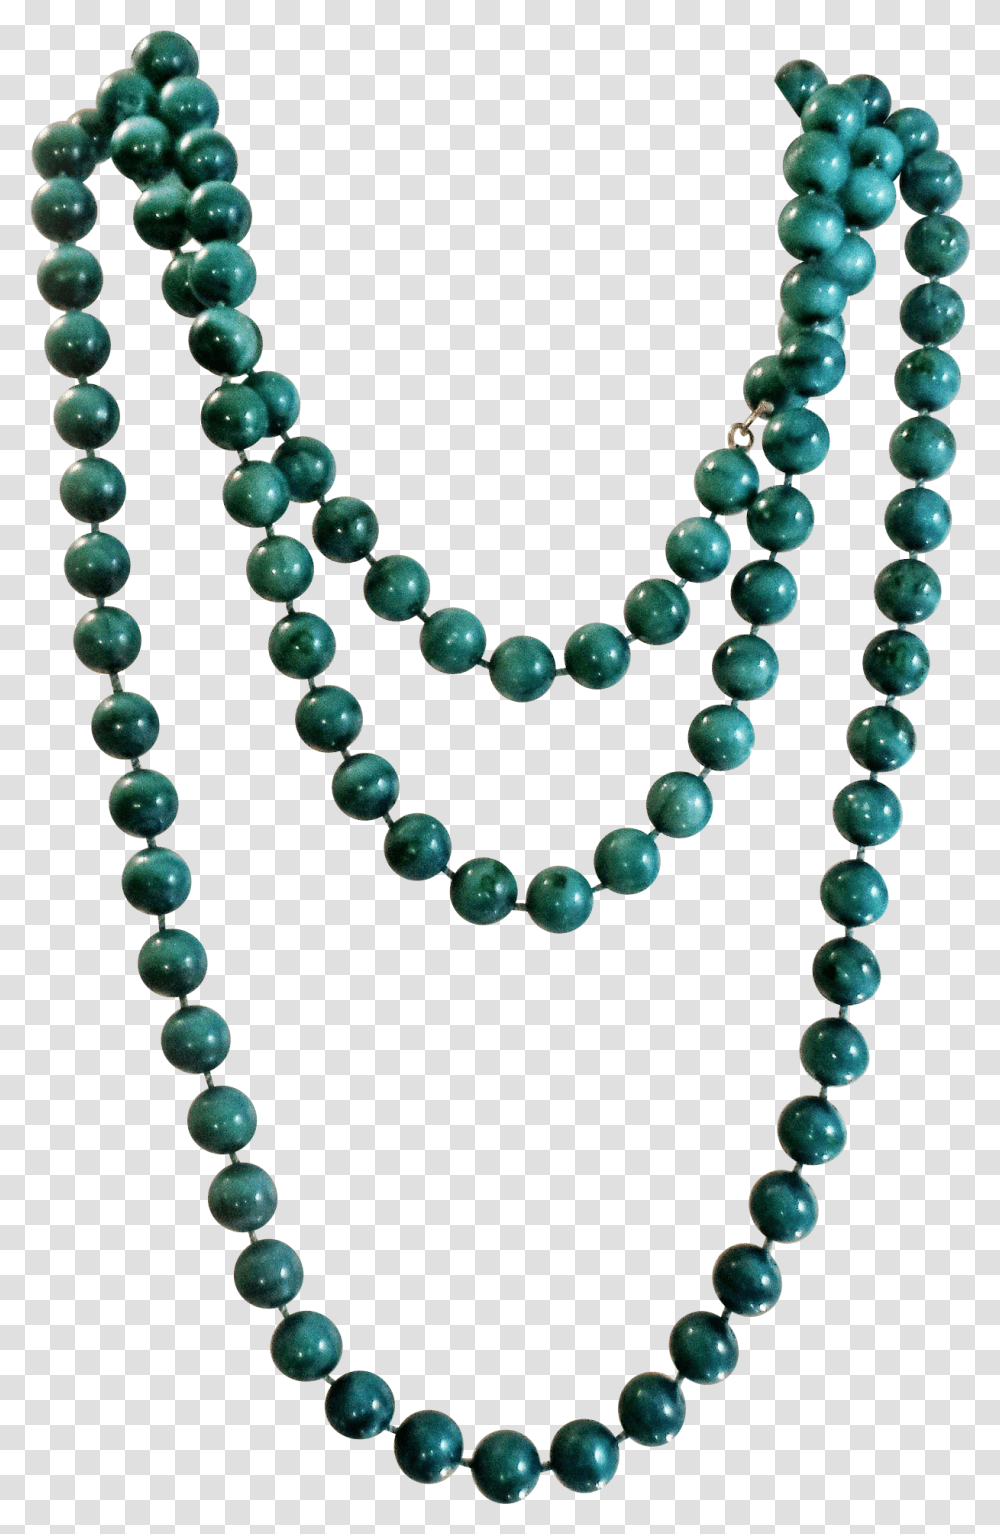 Beads Stylish Inspiration Ideas Vintage Teal Painted Jade Beaded Gold Necklace, Bead Necklace, Jewelry, Ornament, Accessories Transparent Png